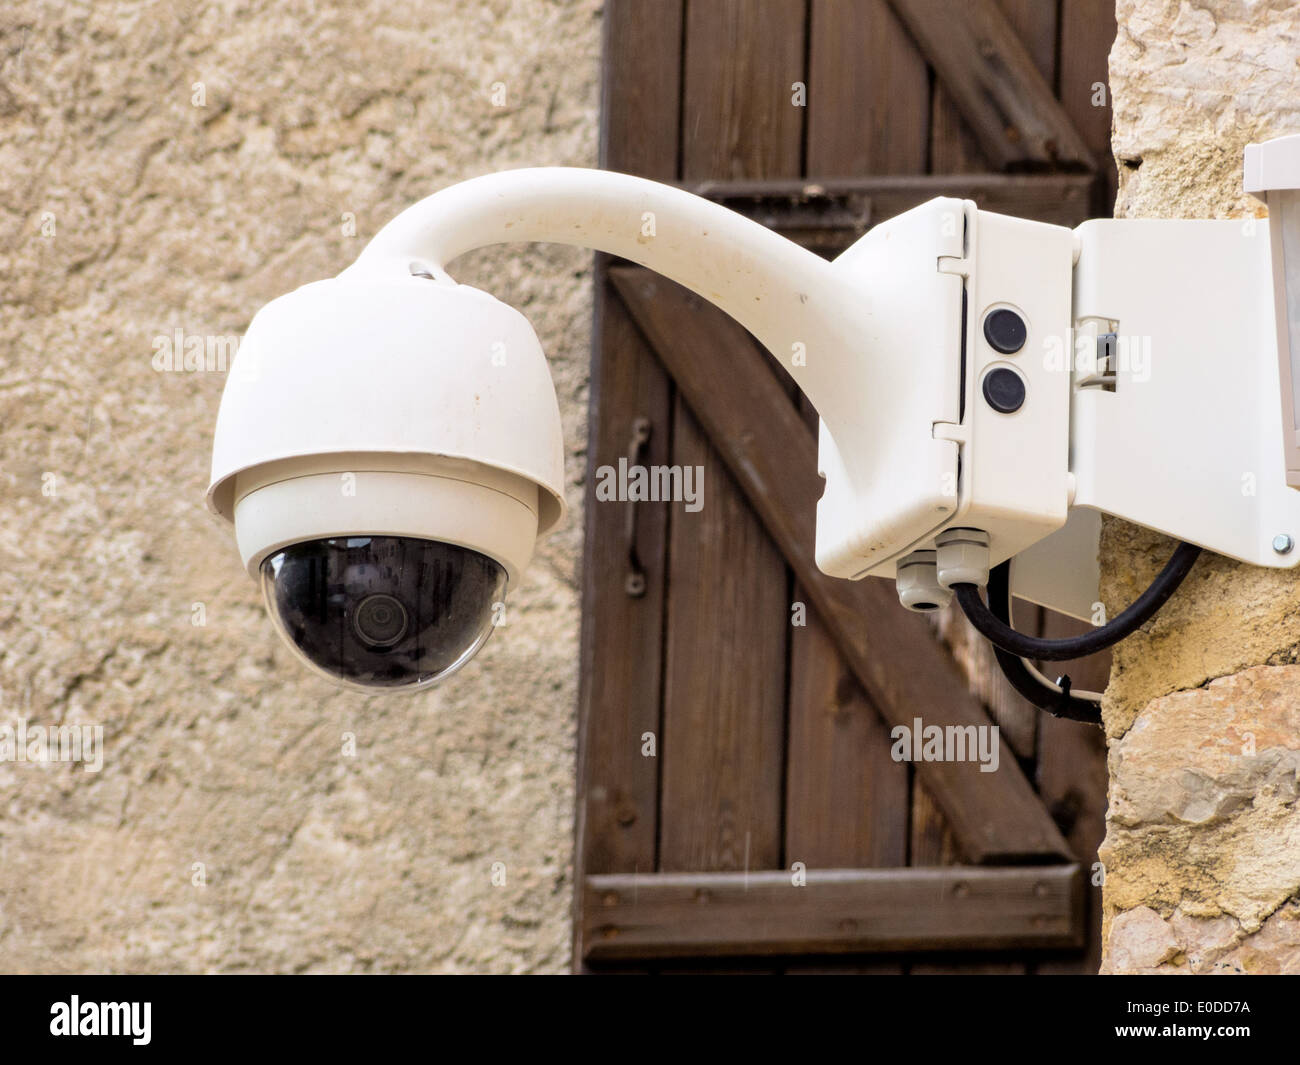 supervision camera by a wall. Videosupervision belongs to the everyday life, ‹berwachungskamera an einer Mauer. Videoueberwachun Stock Photo